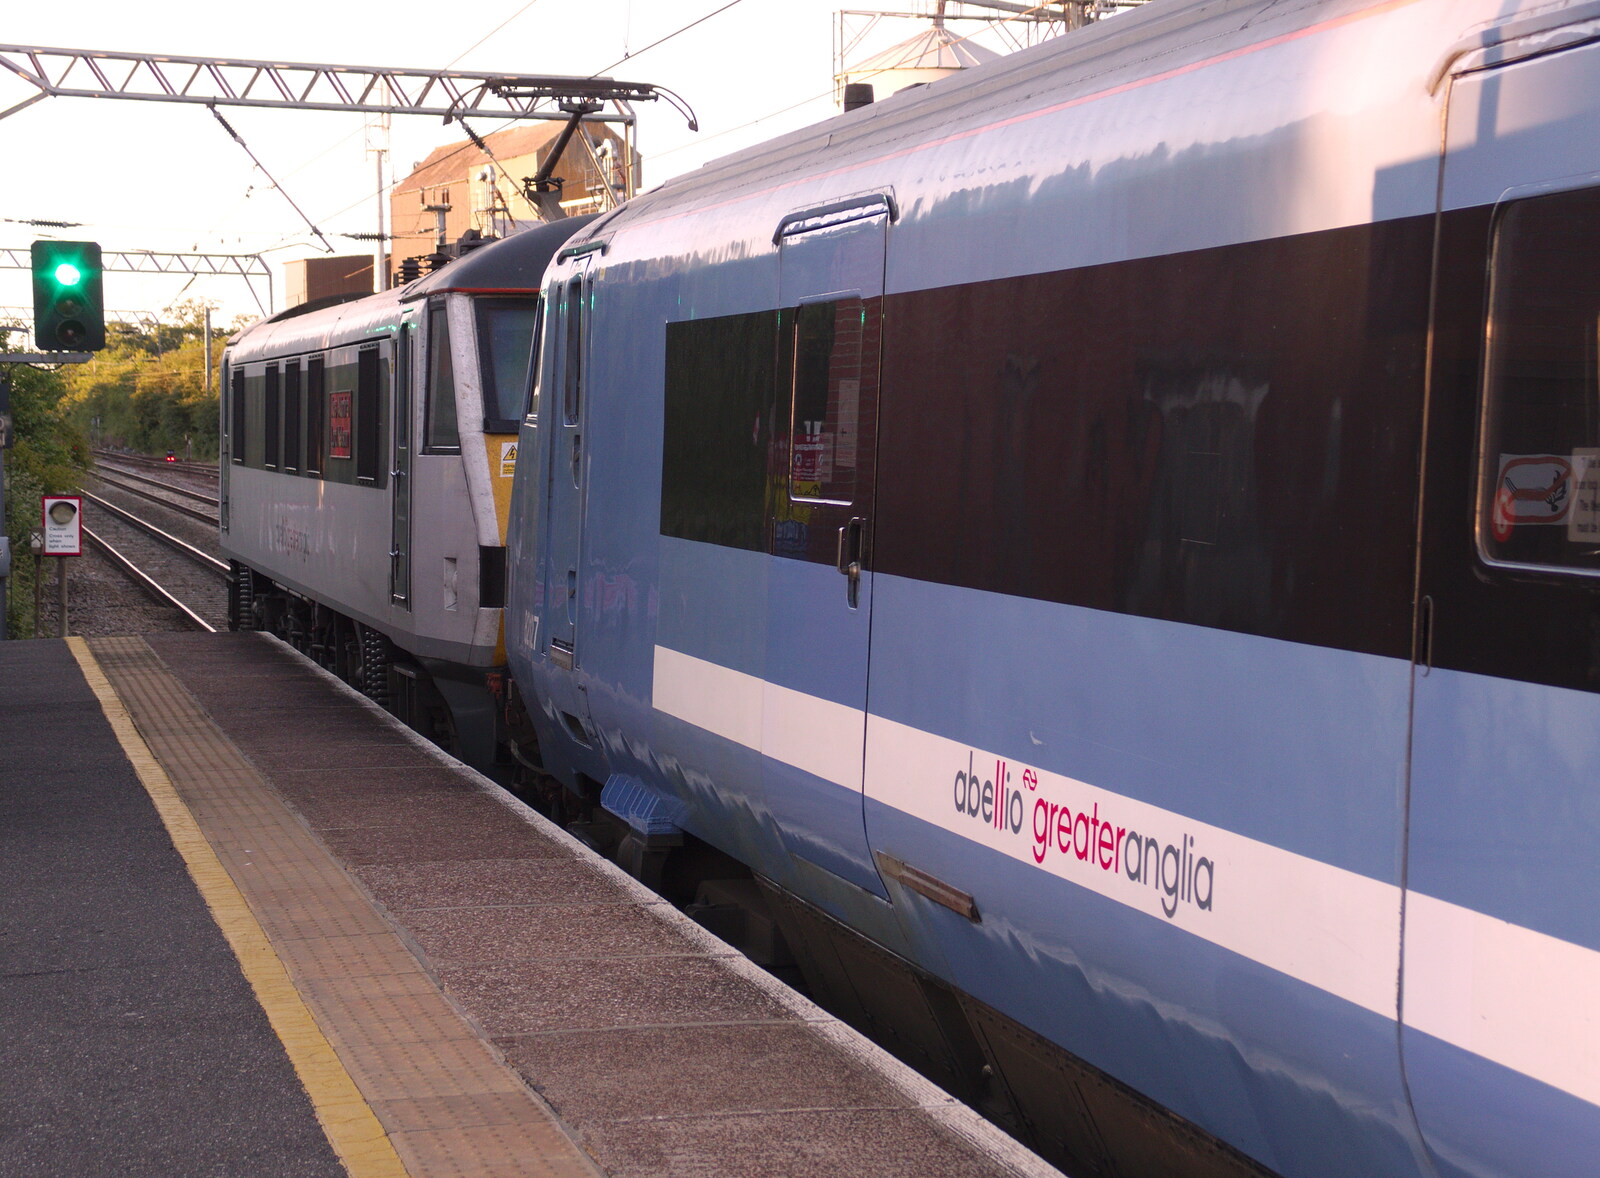 The dead train is hauled off from Railway Hell: A Pantograph Story, Chelmsford, Essex - 17th June 2014